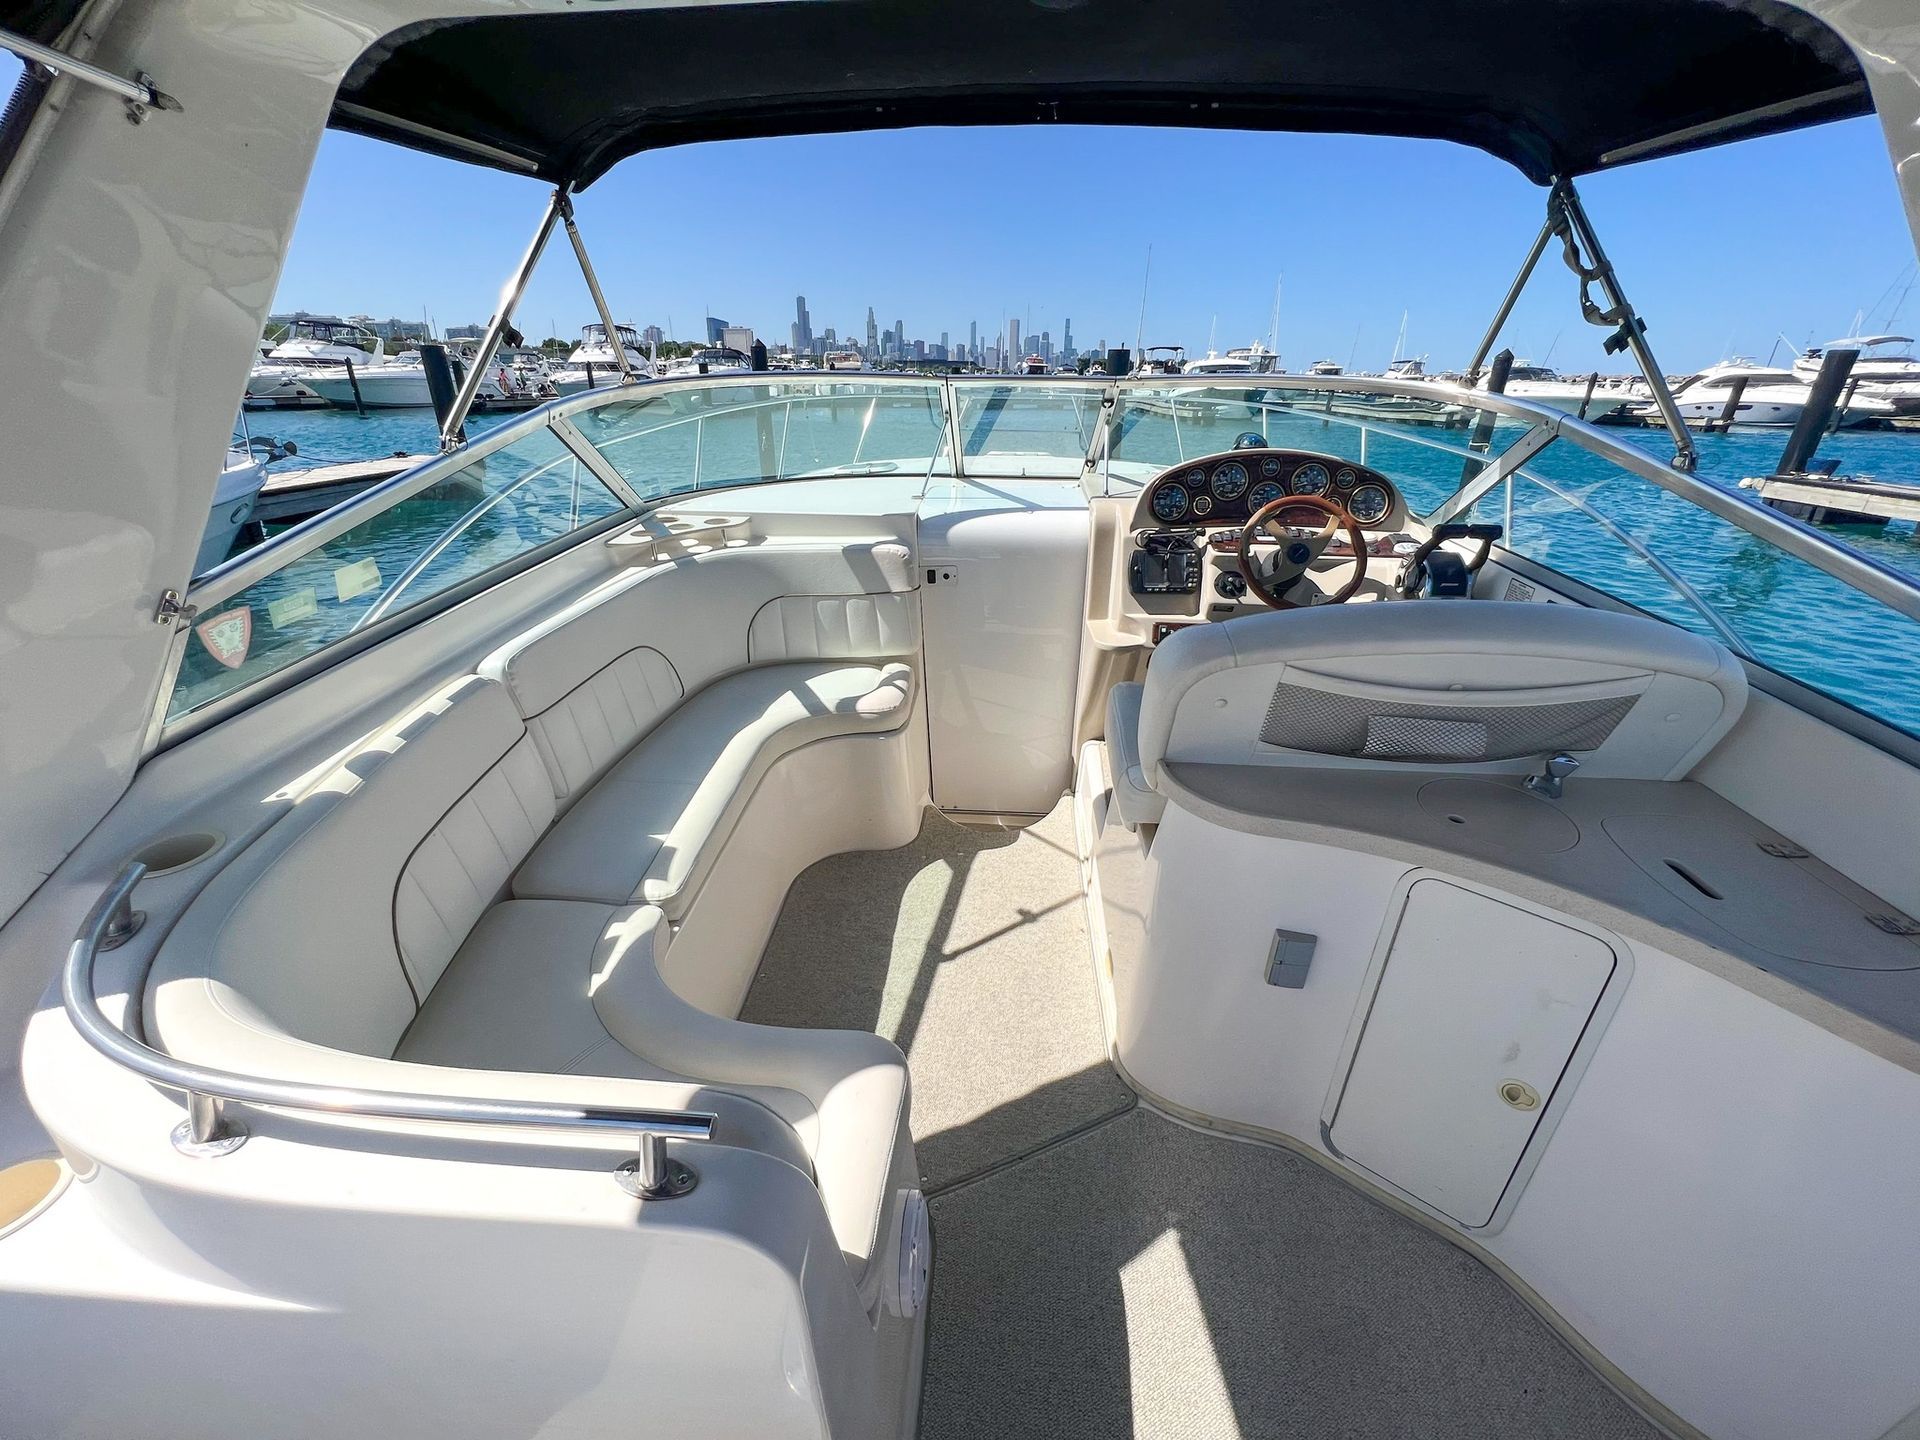 Exploring the Windy City's Waterways with Knot My Boat Charters' Premiere Chicago Yacht Rentals